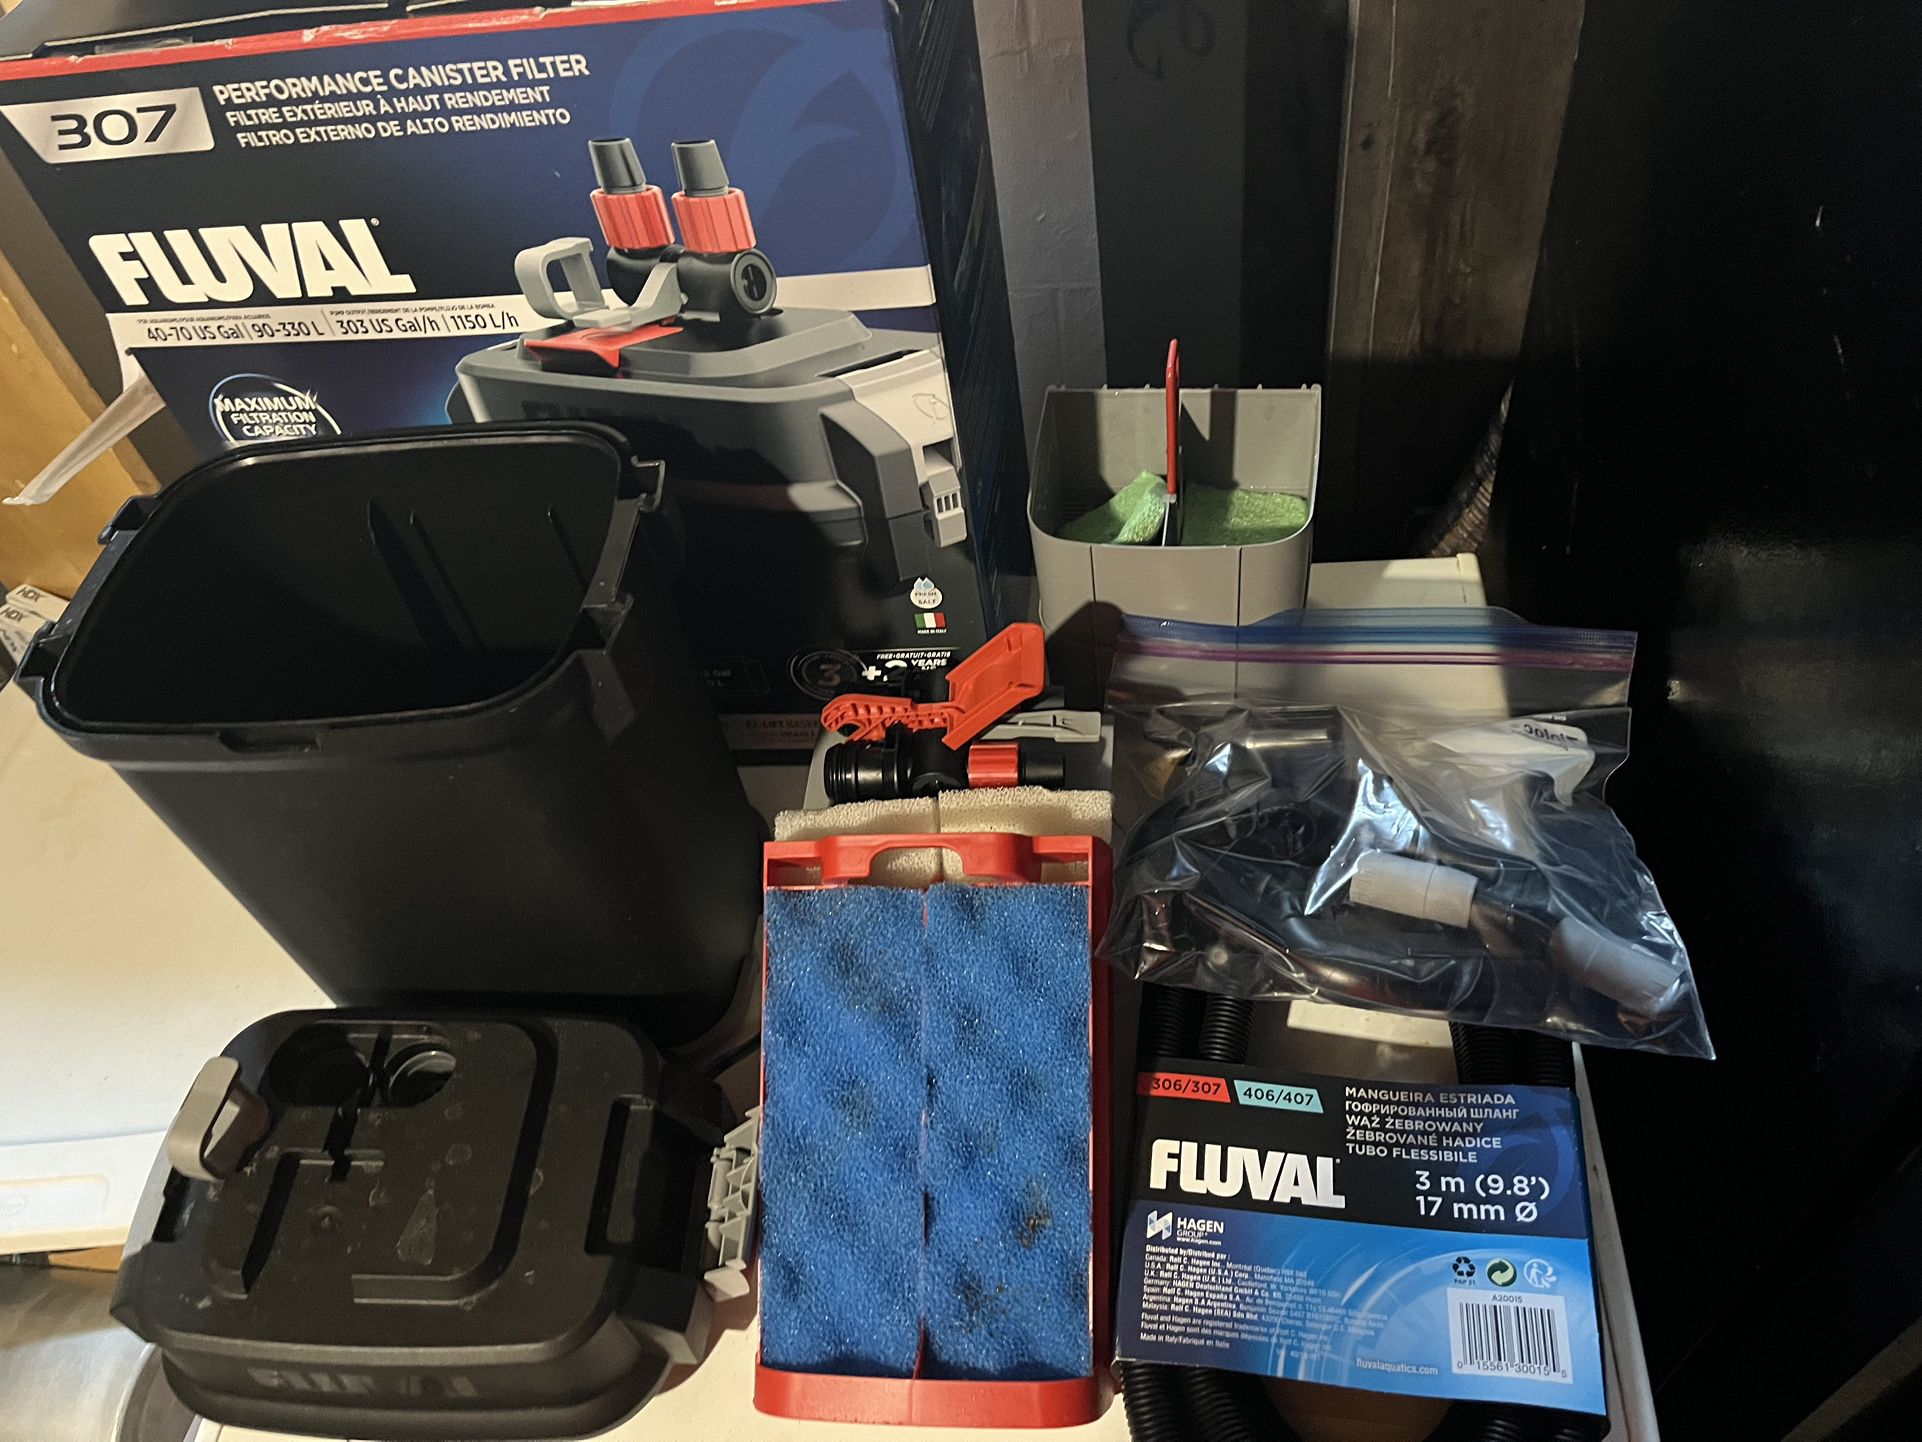 Used Fluval 307 Canister Filter